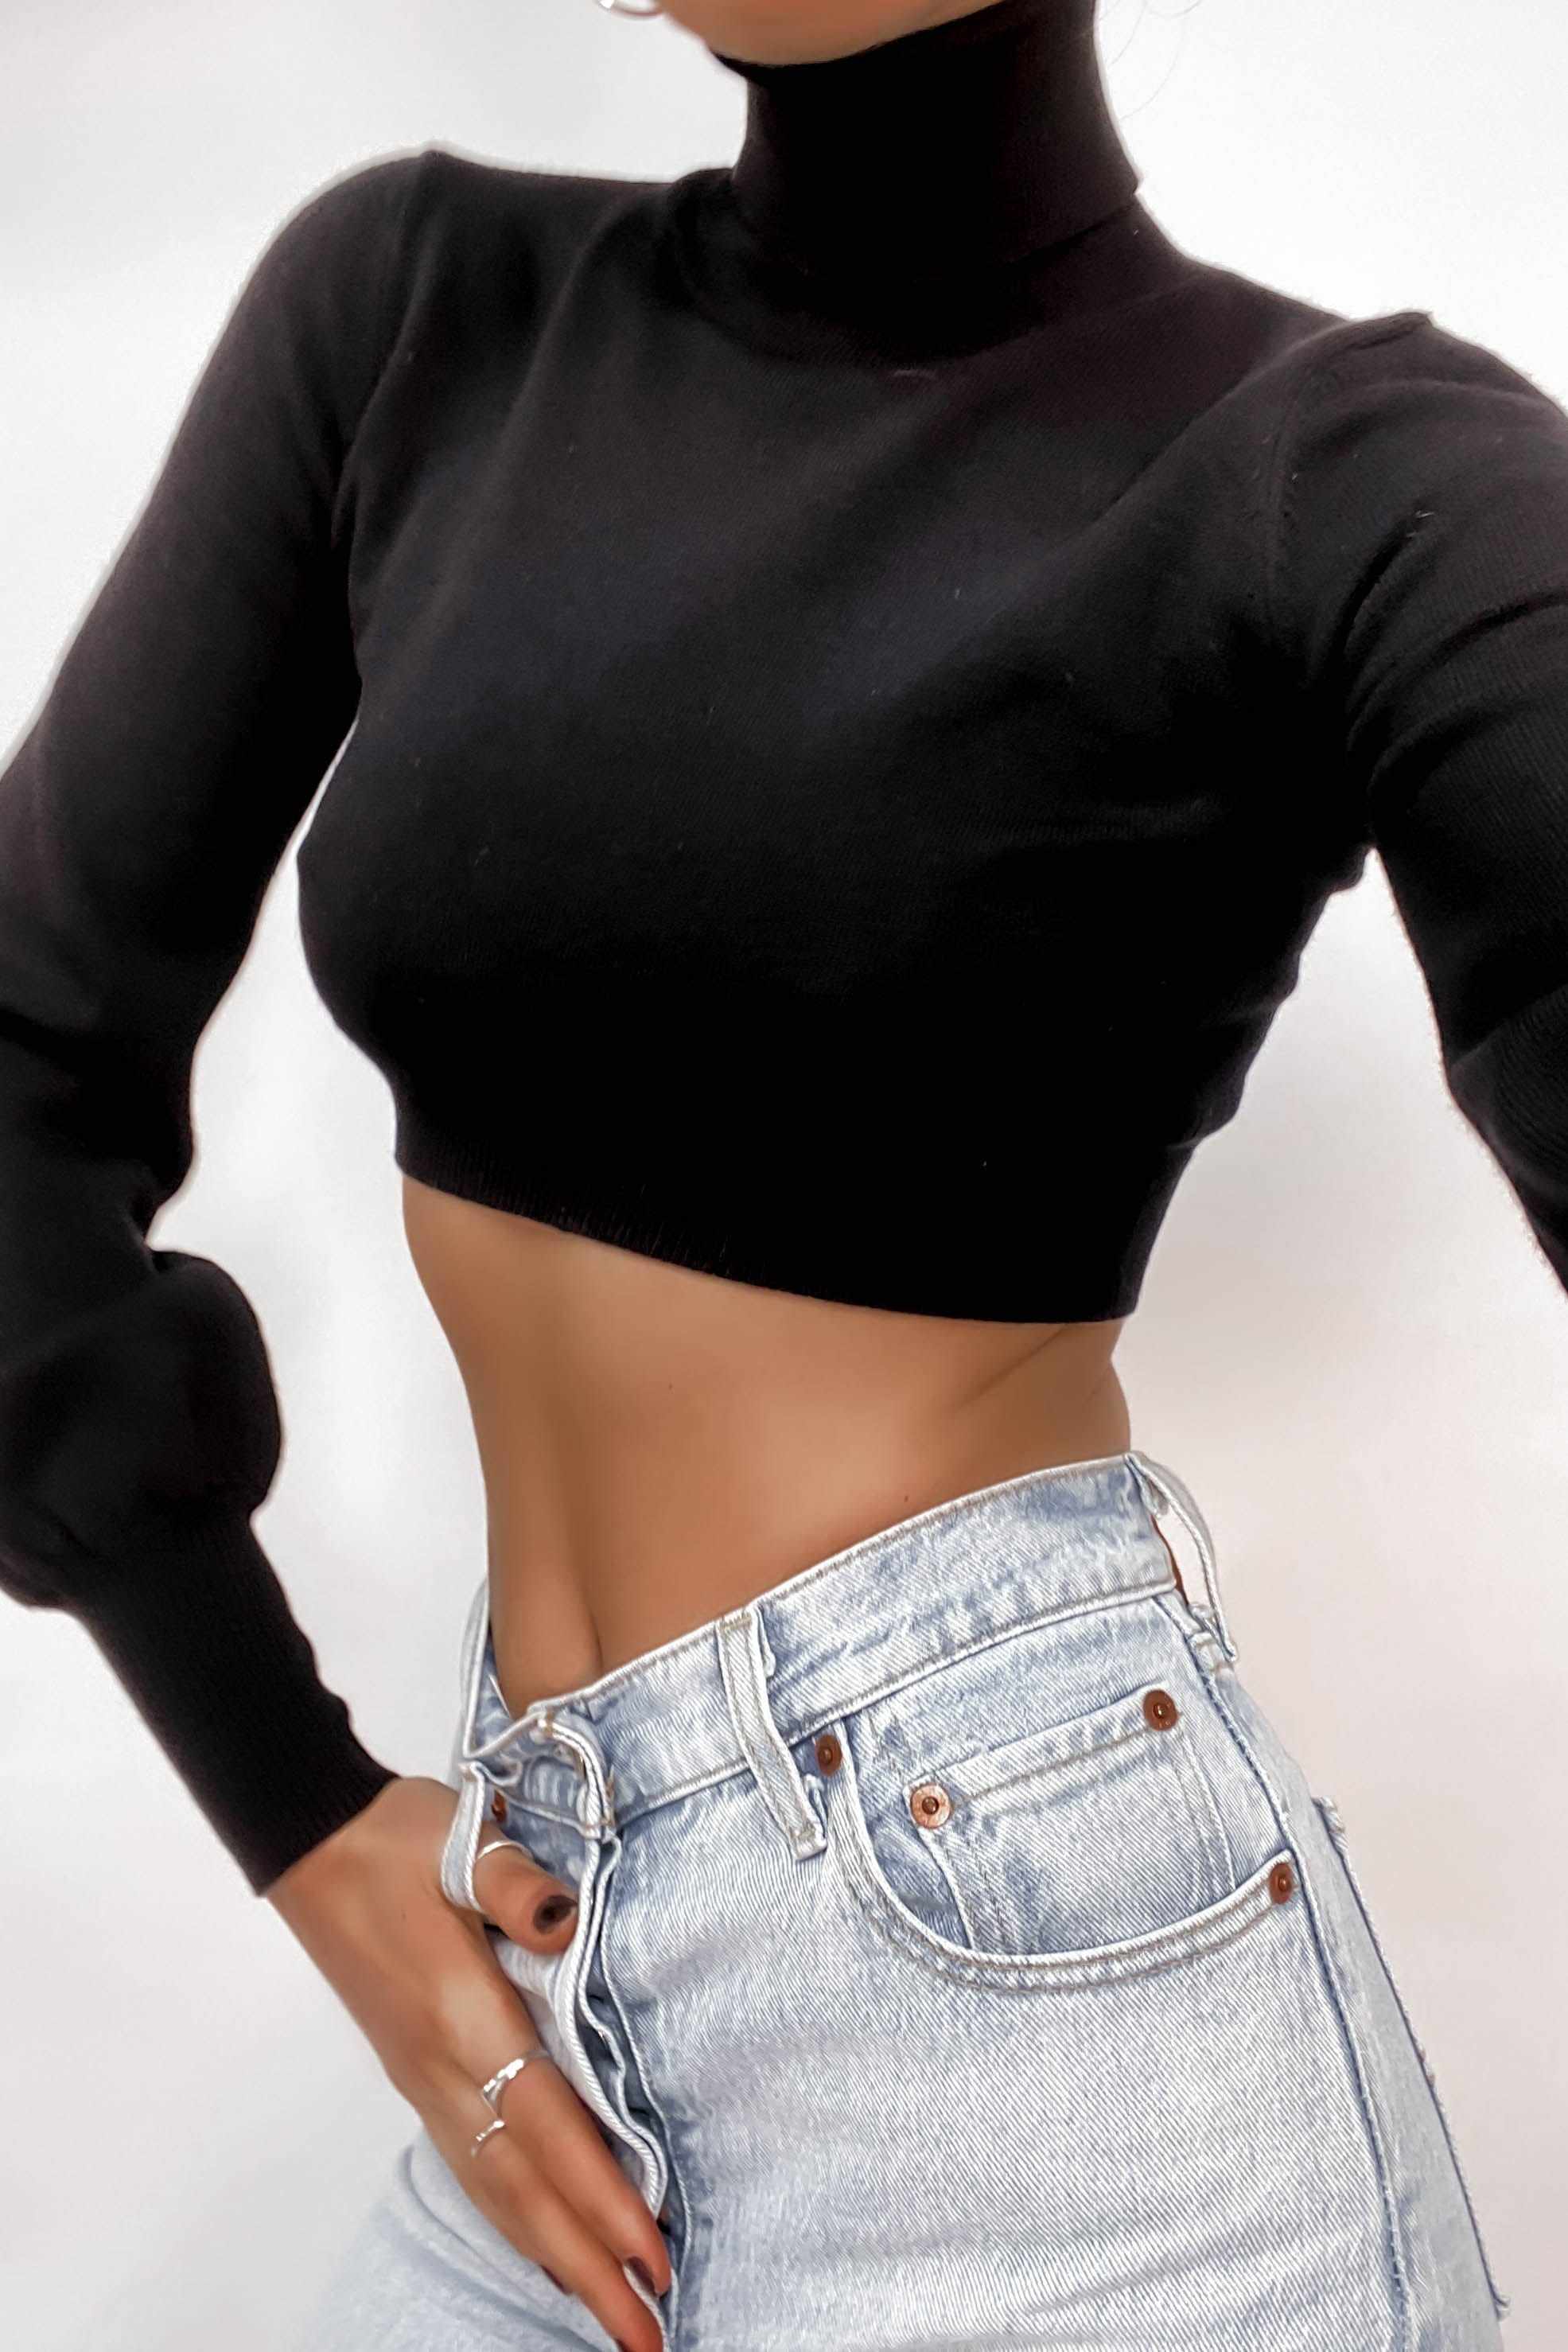 Harlem Top, BASICS, BLACK, CROP TOP, CROP TOPS, Sale, TOPS, Our New Harlem Top Is Now Only $50.00 Exclusive At Mishkah, Our New Harlem Top is now only $50.00-We Have The Latest Women's Tops @ Mishkah Online Fashion Boutique-MISHKAH